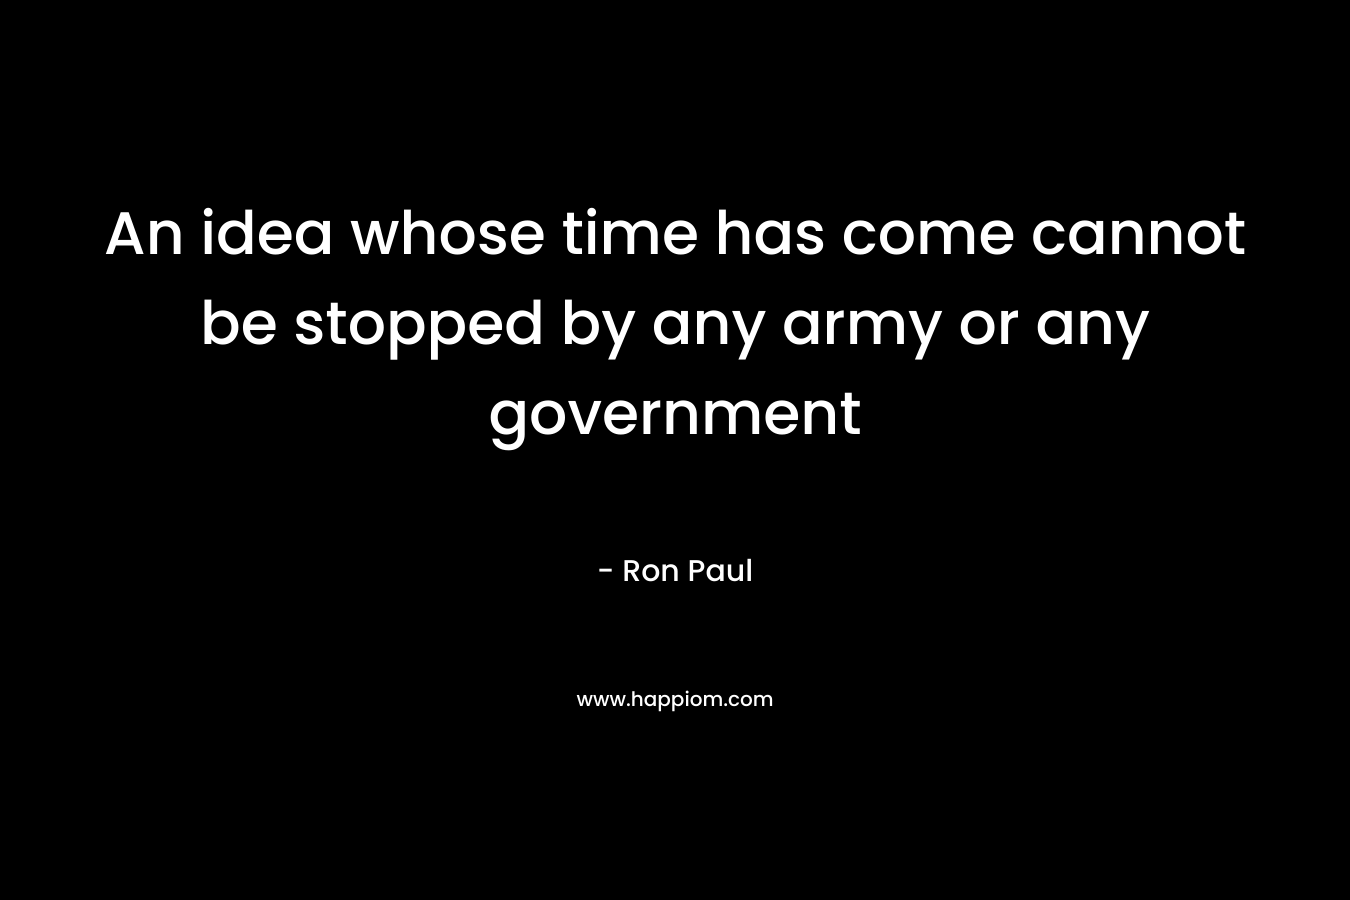 An idea whose time has come cannot be stopped by any army or any government